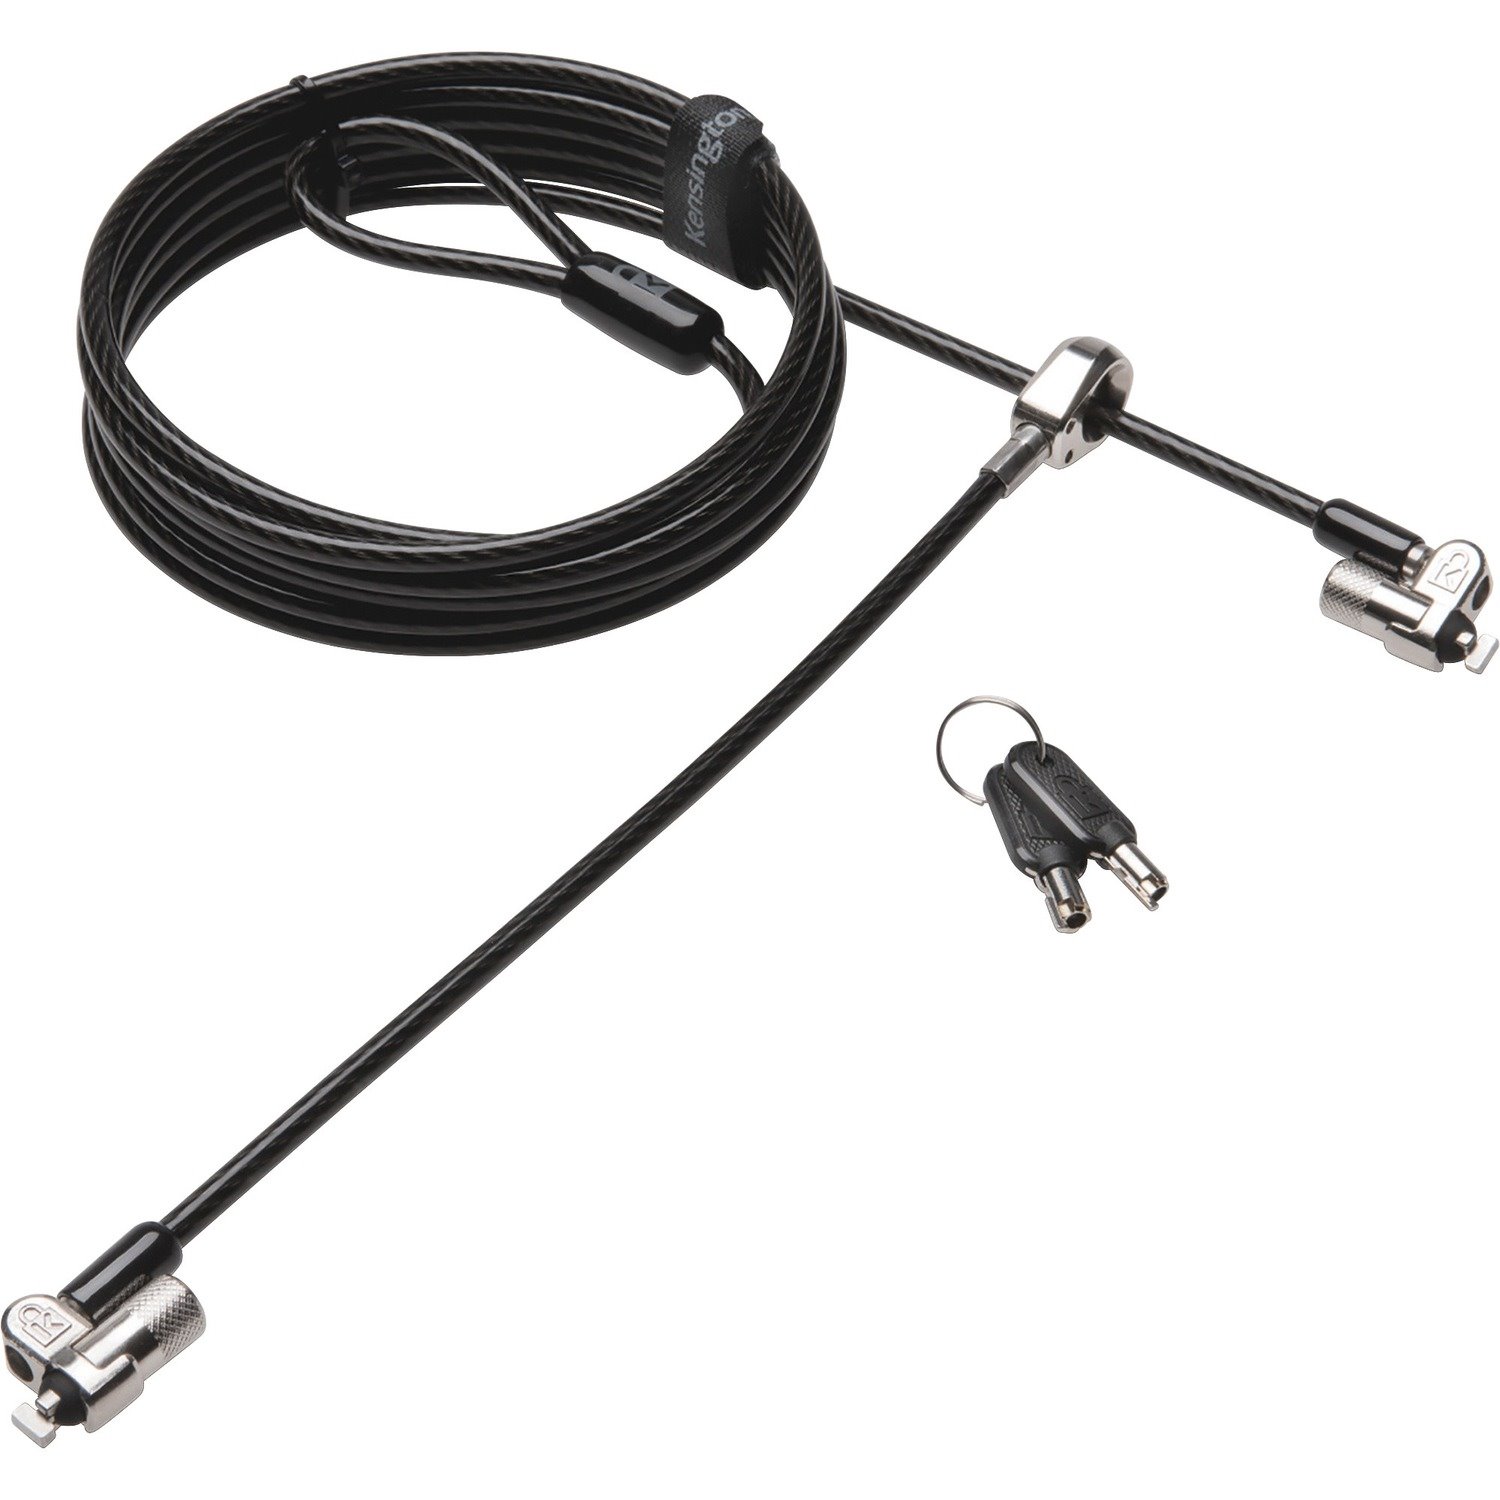 Kensington MicroSaver Cable Lock For Notebook, Tablet